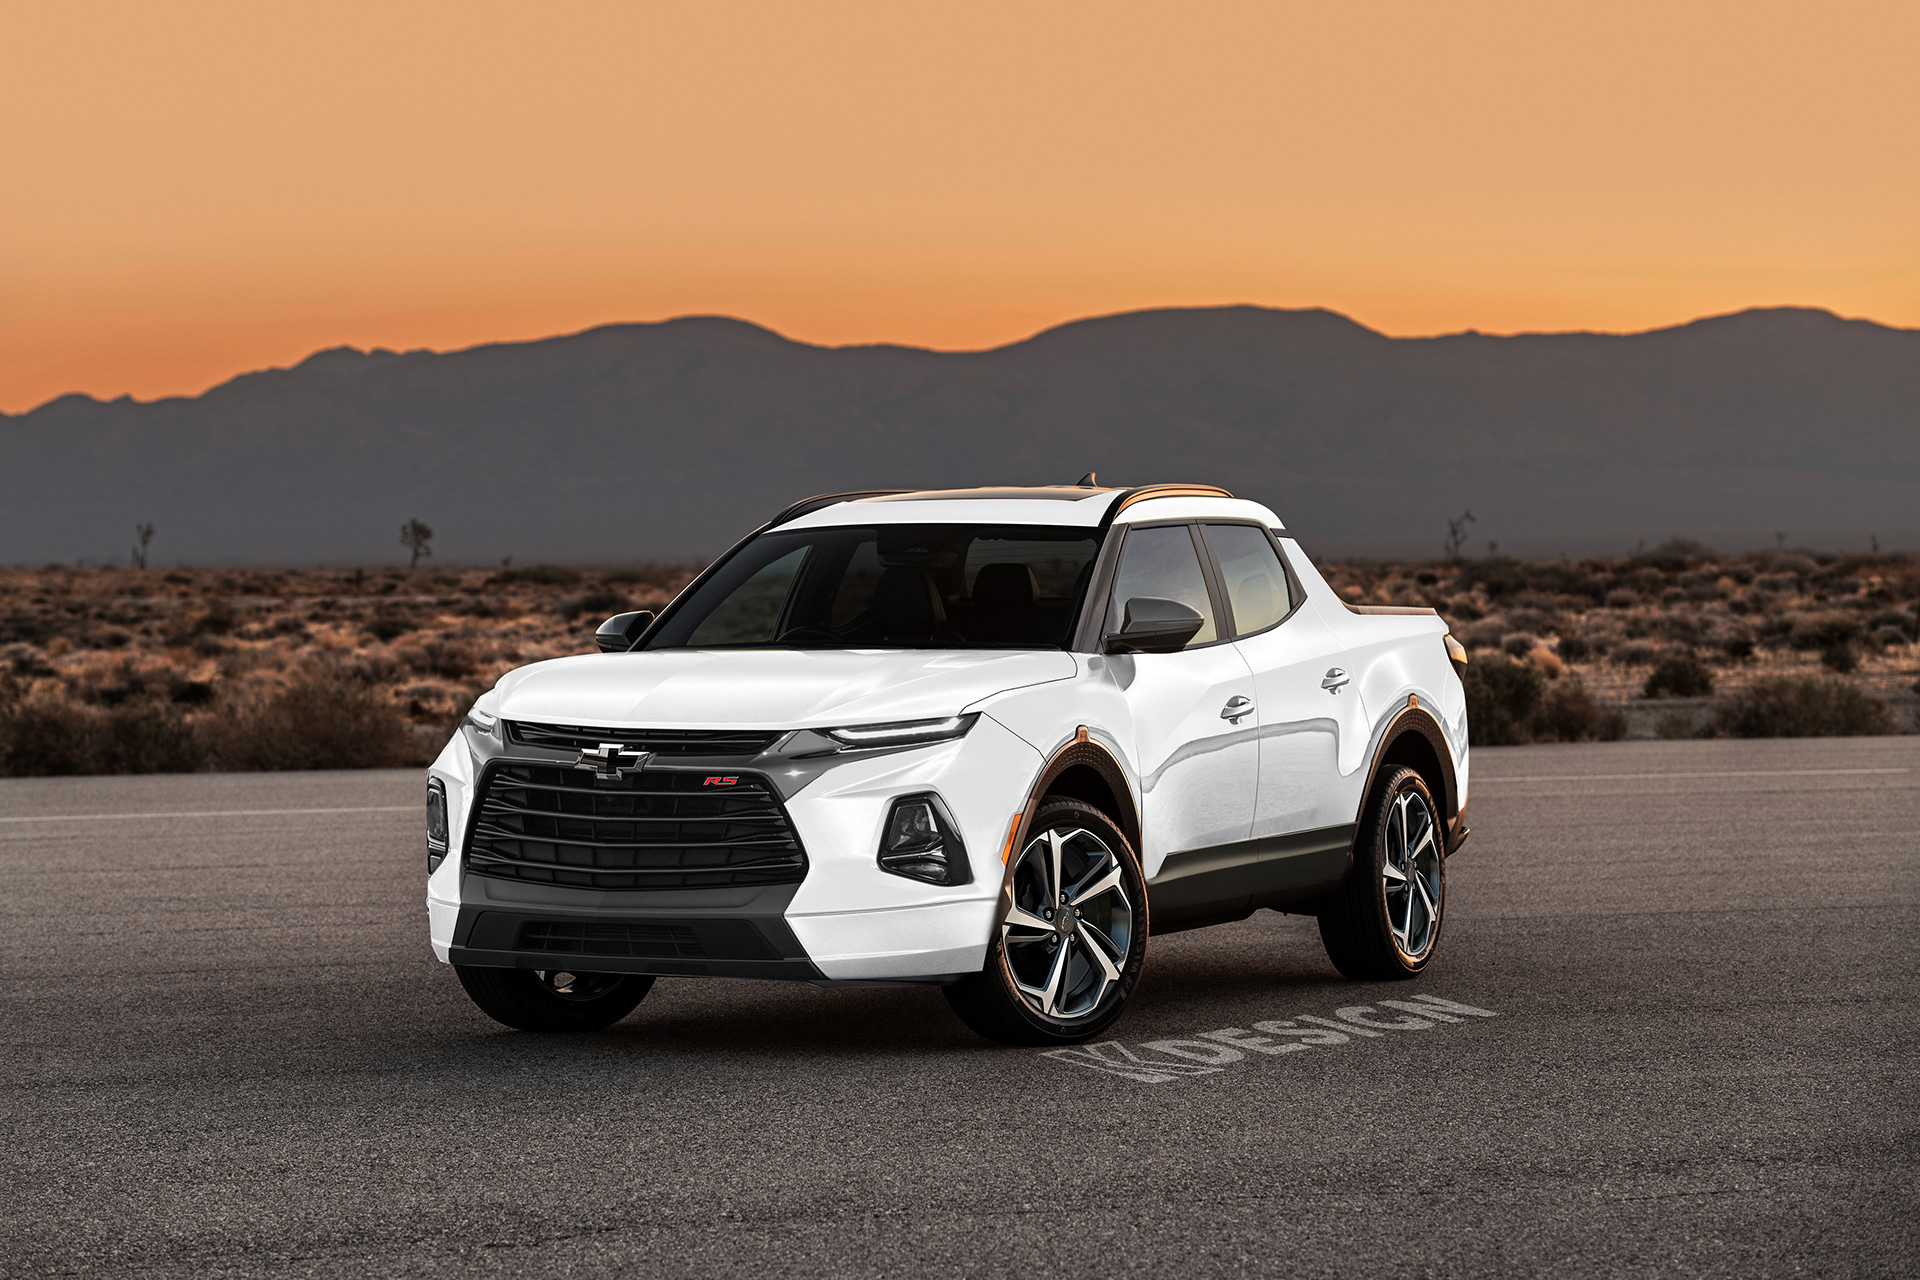 2023 chevrolet montana small pickup truck confirmed for production in brazil 161096 1